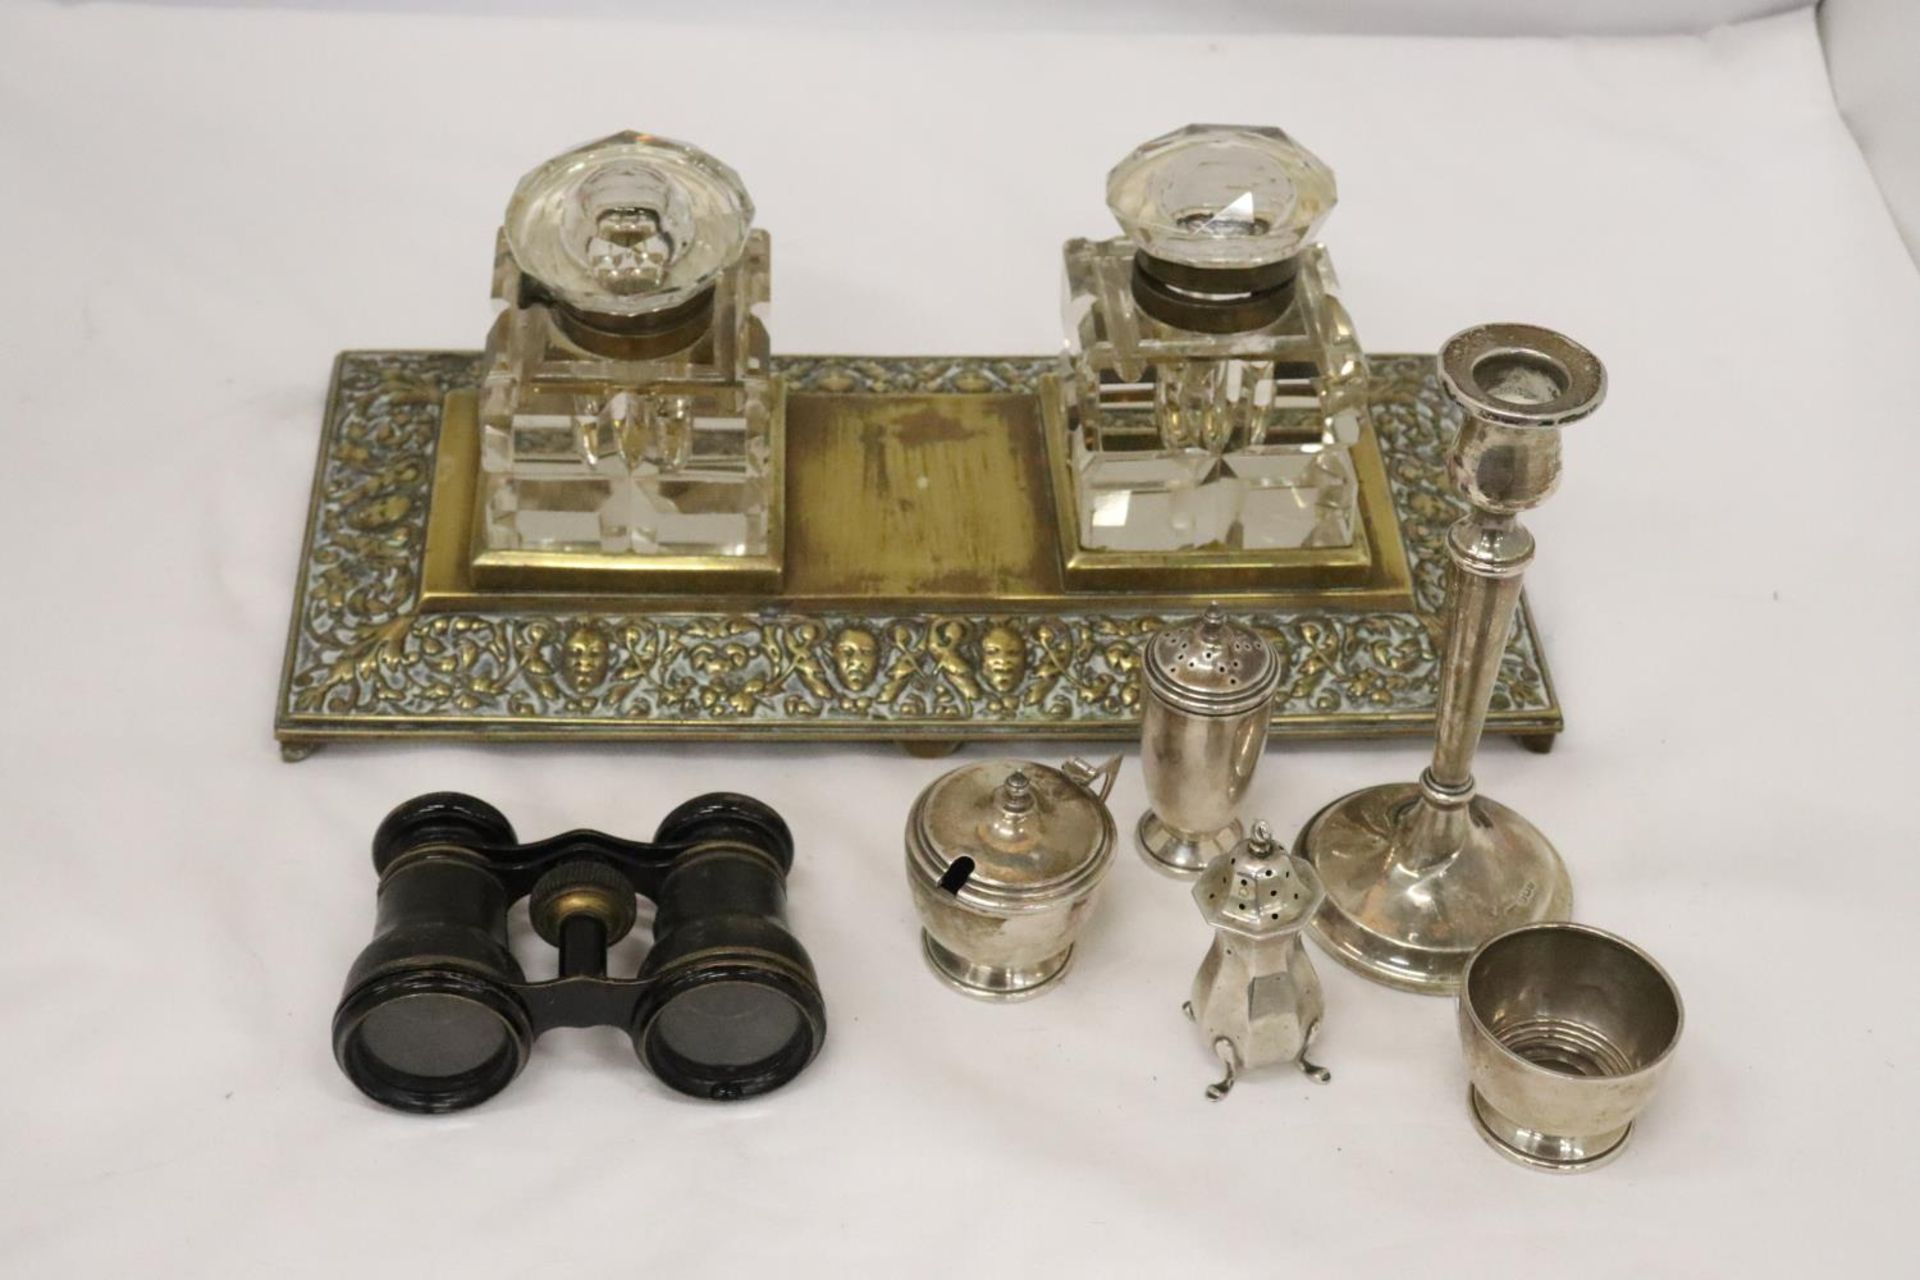 A VINTAGE FOOTED BRASS DOUBLE INK WELL TOGETHER WITH OPERA GLASSES AND VARIOUS SILVER PLATE